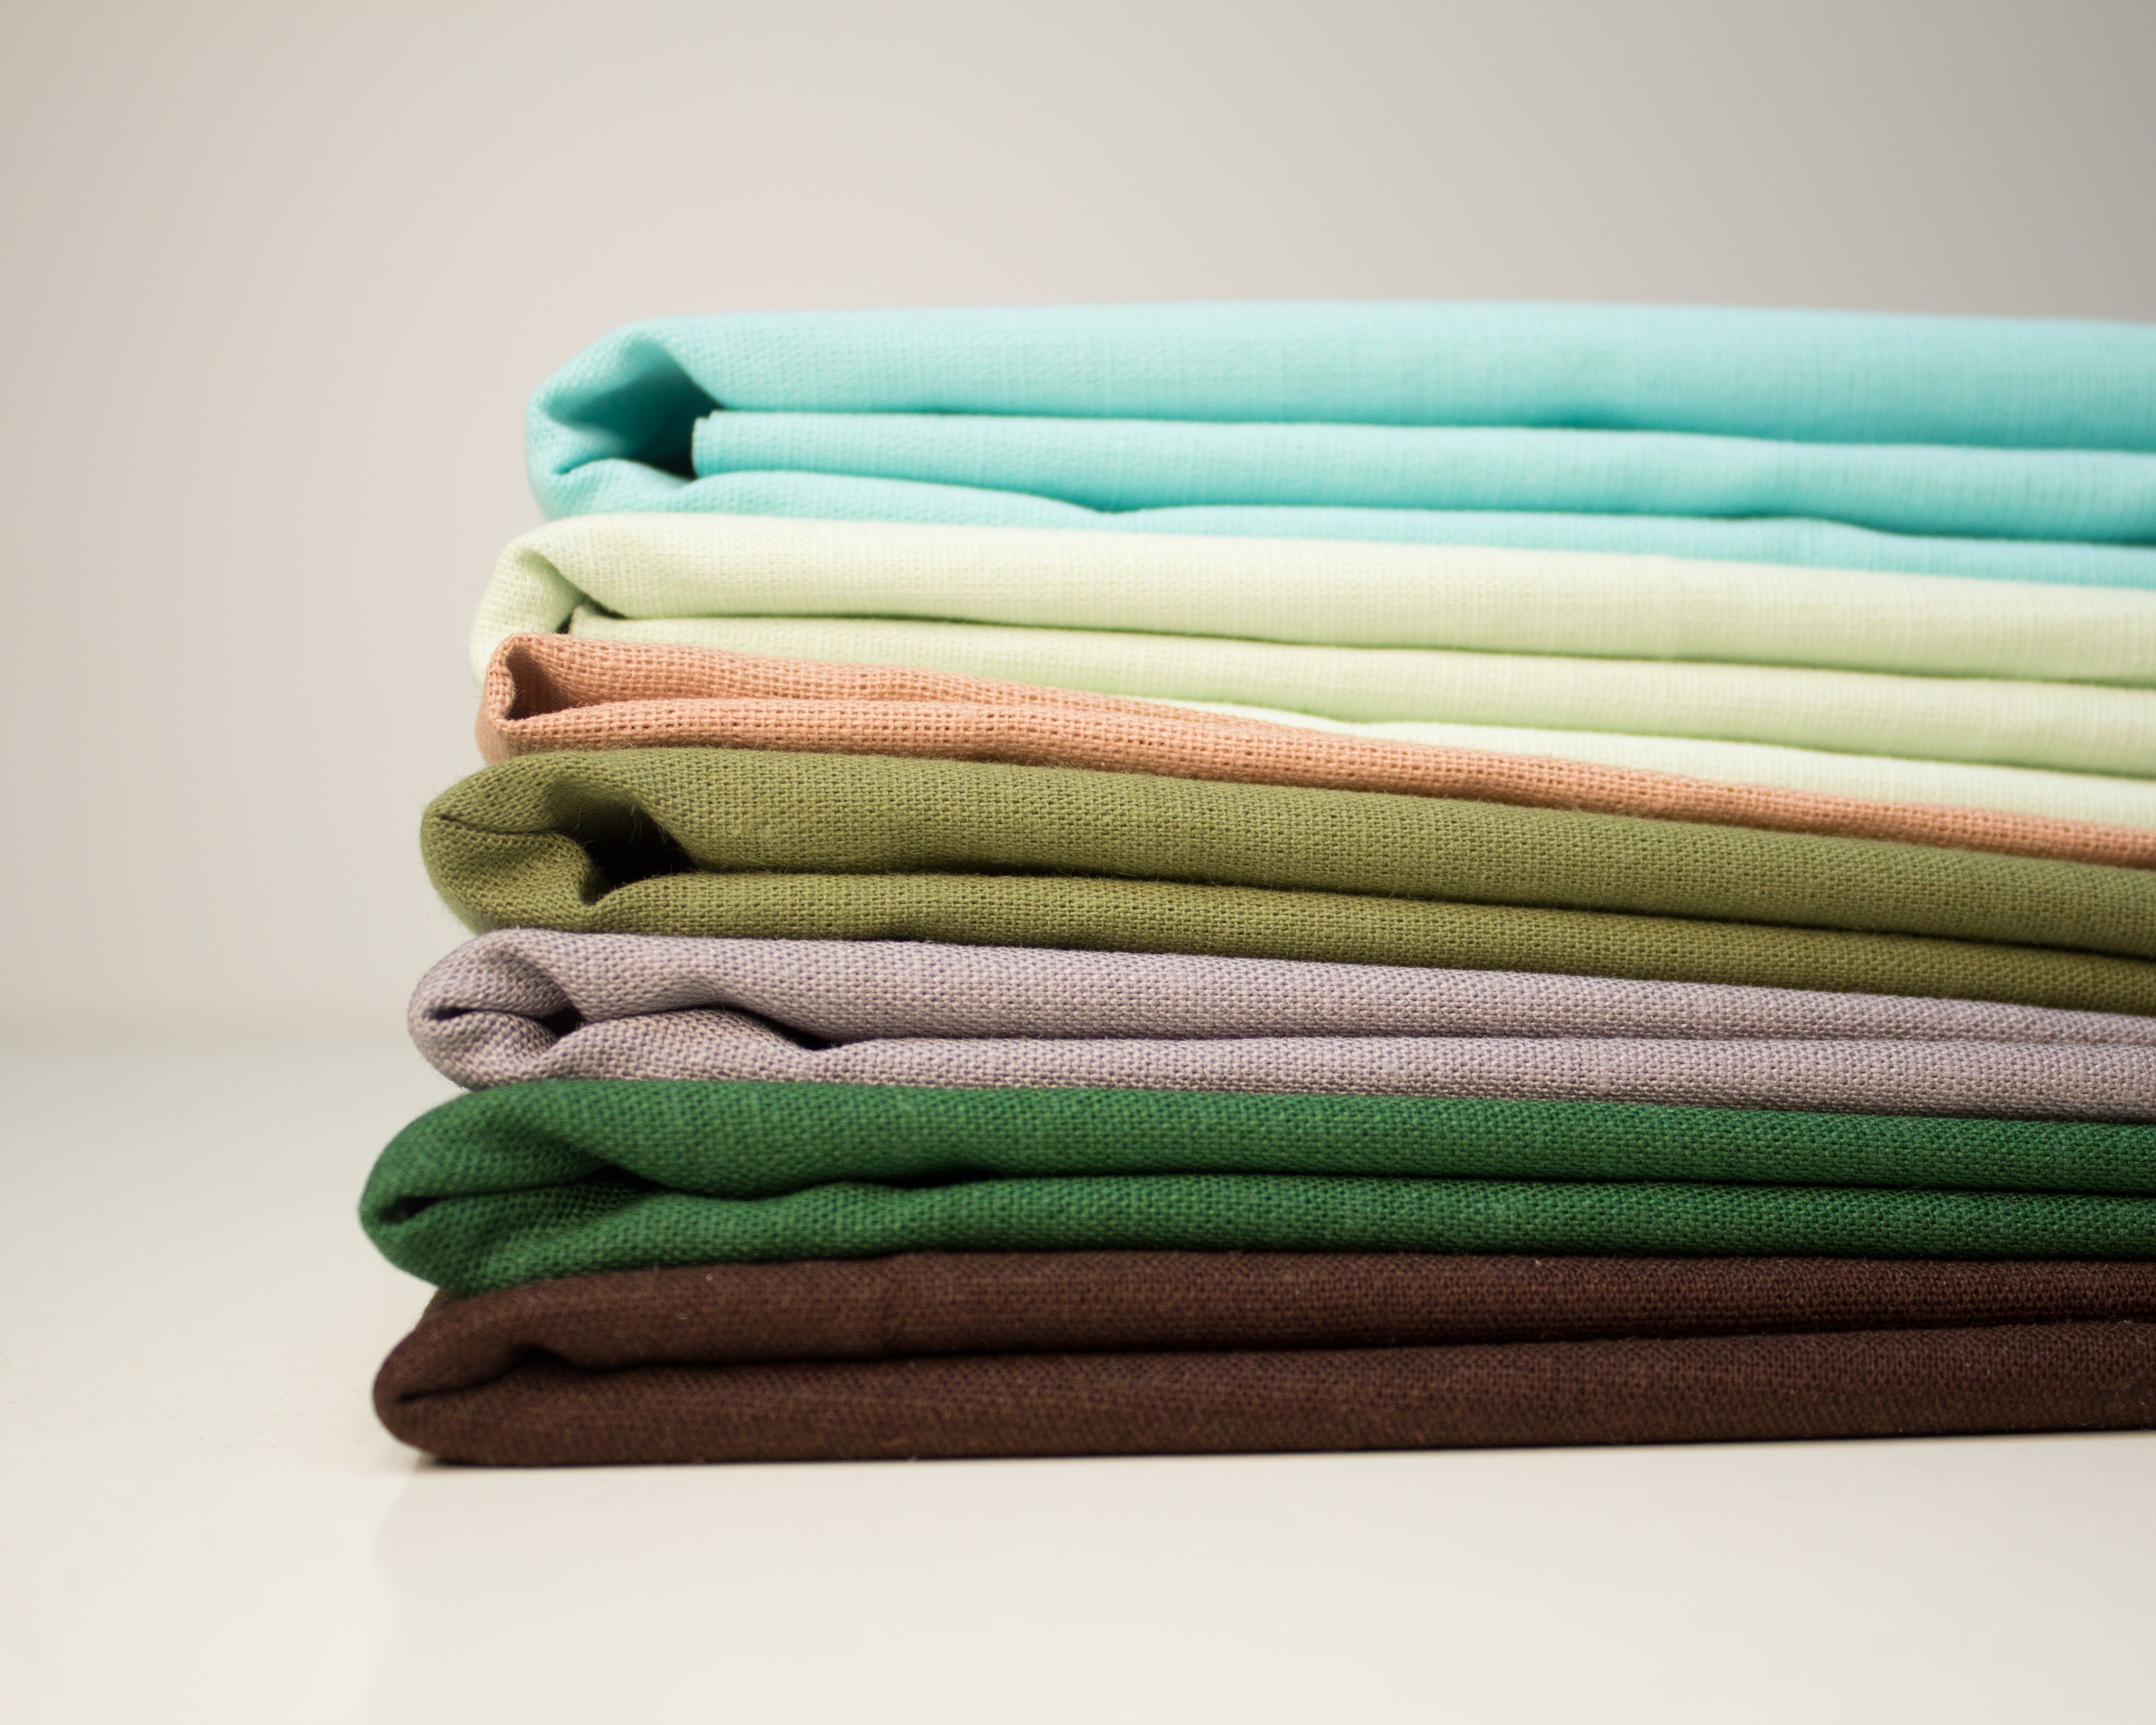 Bamboo vs. modal – which is the better eco-friendly fabric?